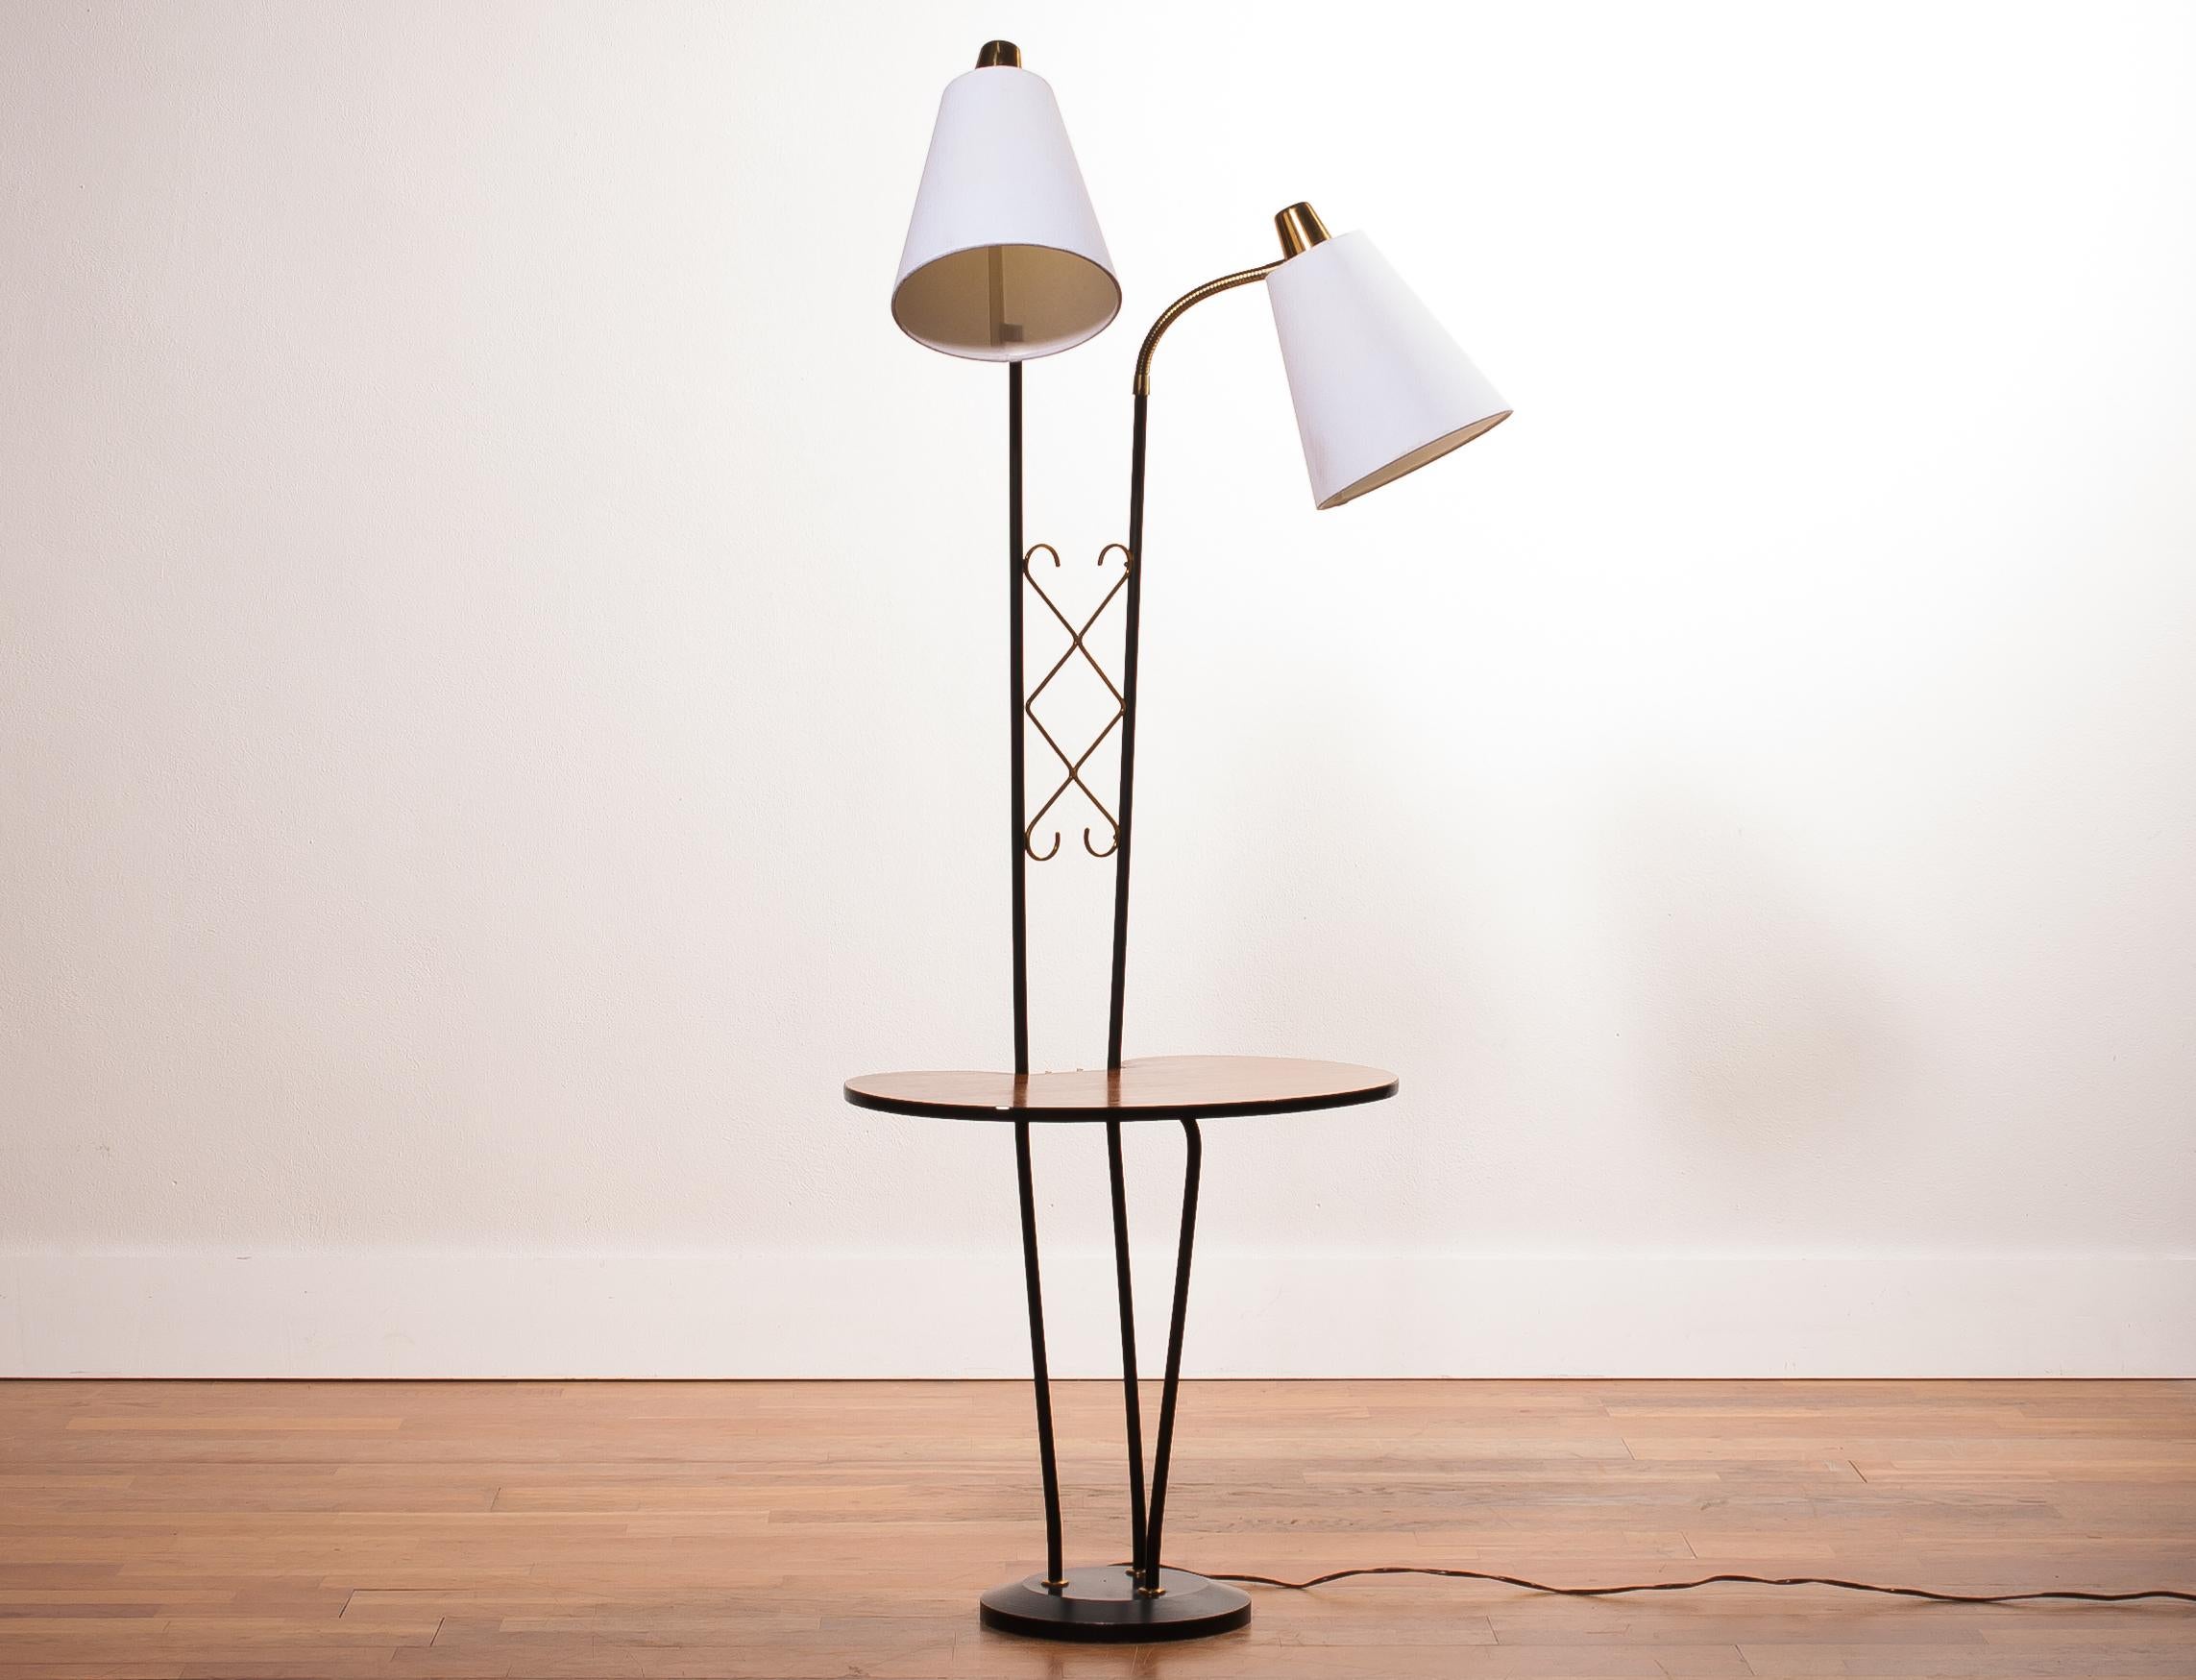 Beautiful floor lamp consistent two lamps and a table made in Sweden.
The lamp is made of a metal black with brass frame, a teak table and two lamps with new white shades.
It is in wonderful condition.
Period 1950s.
Dimensions: H 150 cm, W 54